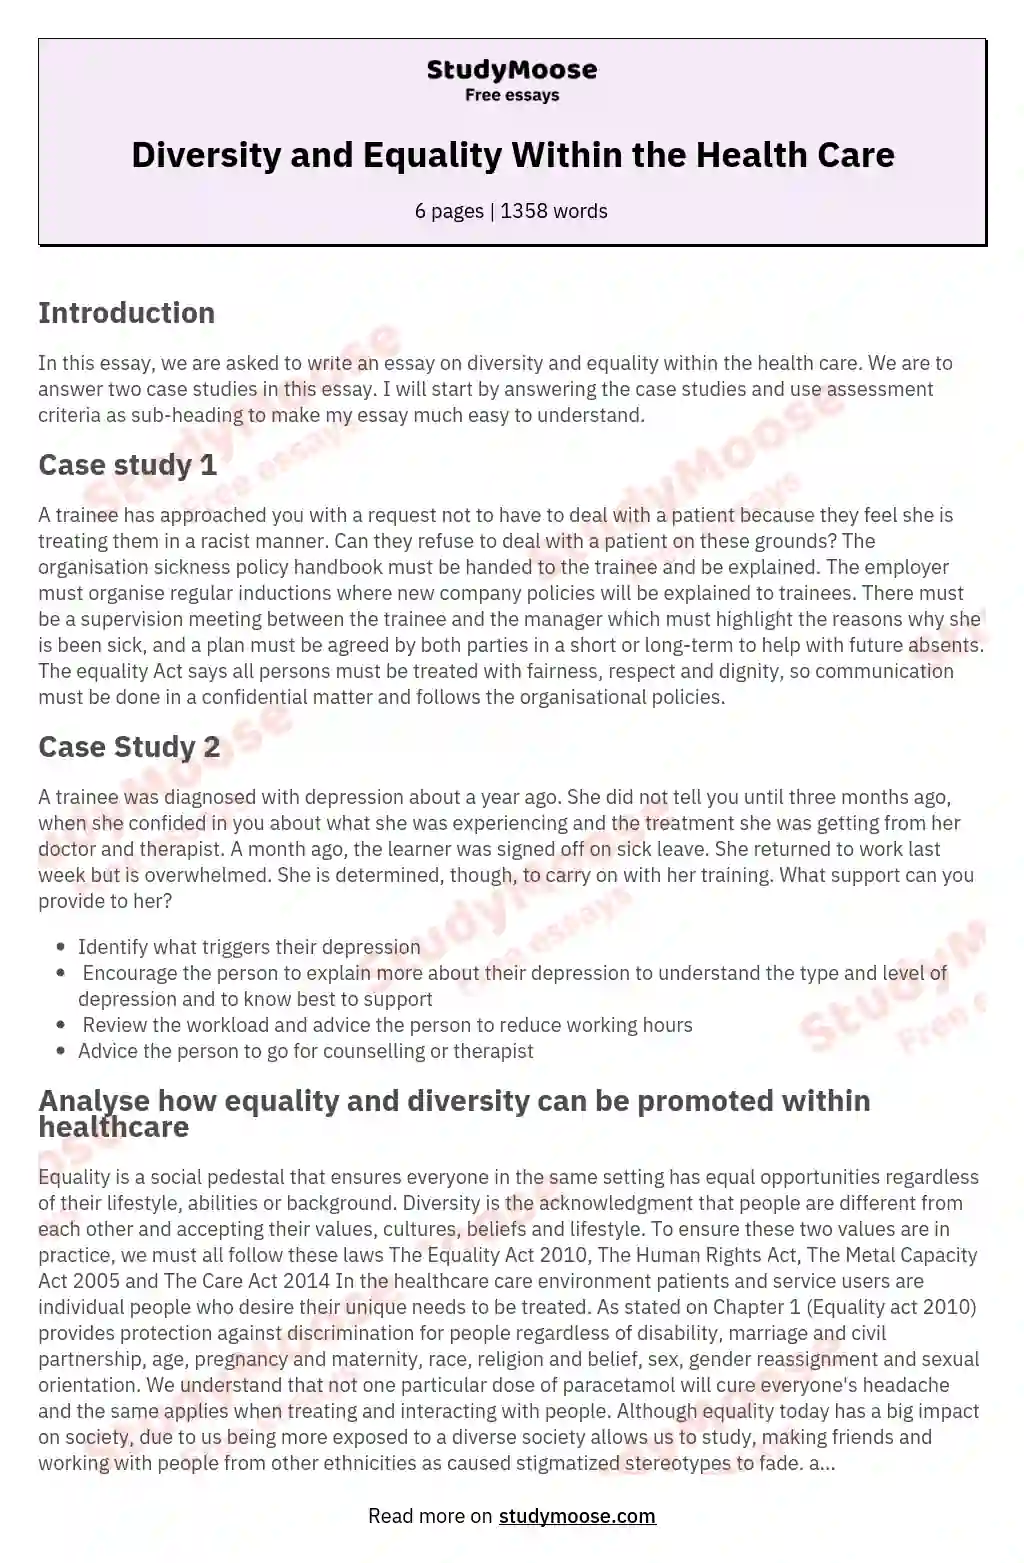 Diversity and Equality Within the Health Care essay